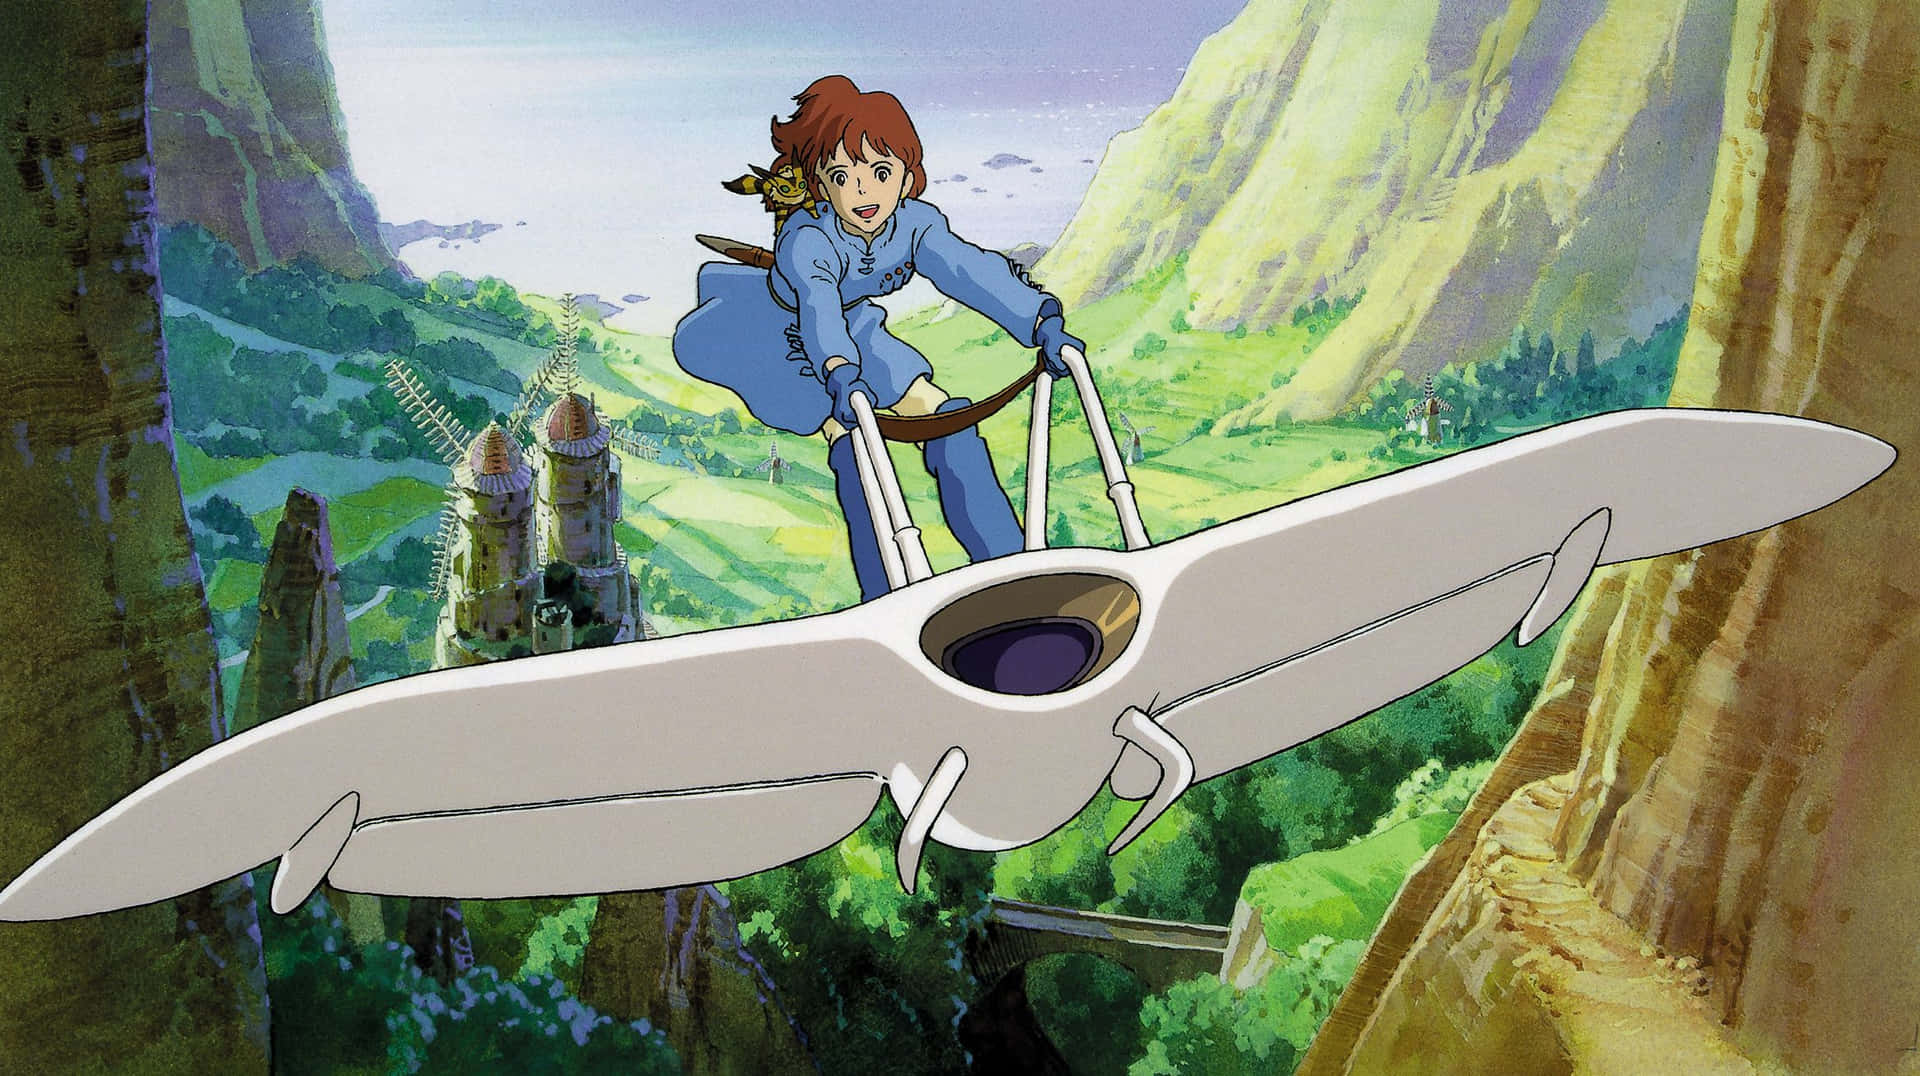 Nausicaä soaring through the sky on her glider in the Valley of the Wind Wallpaper